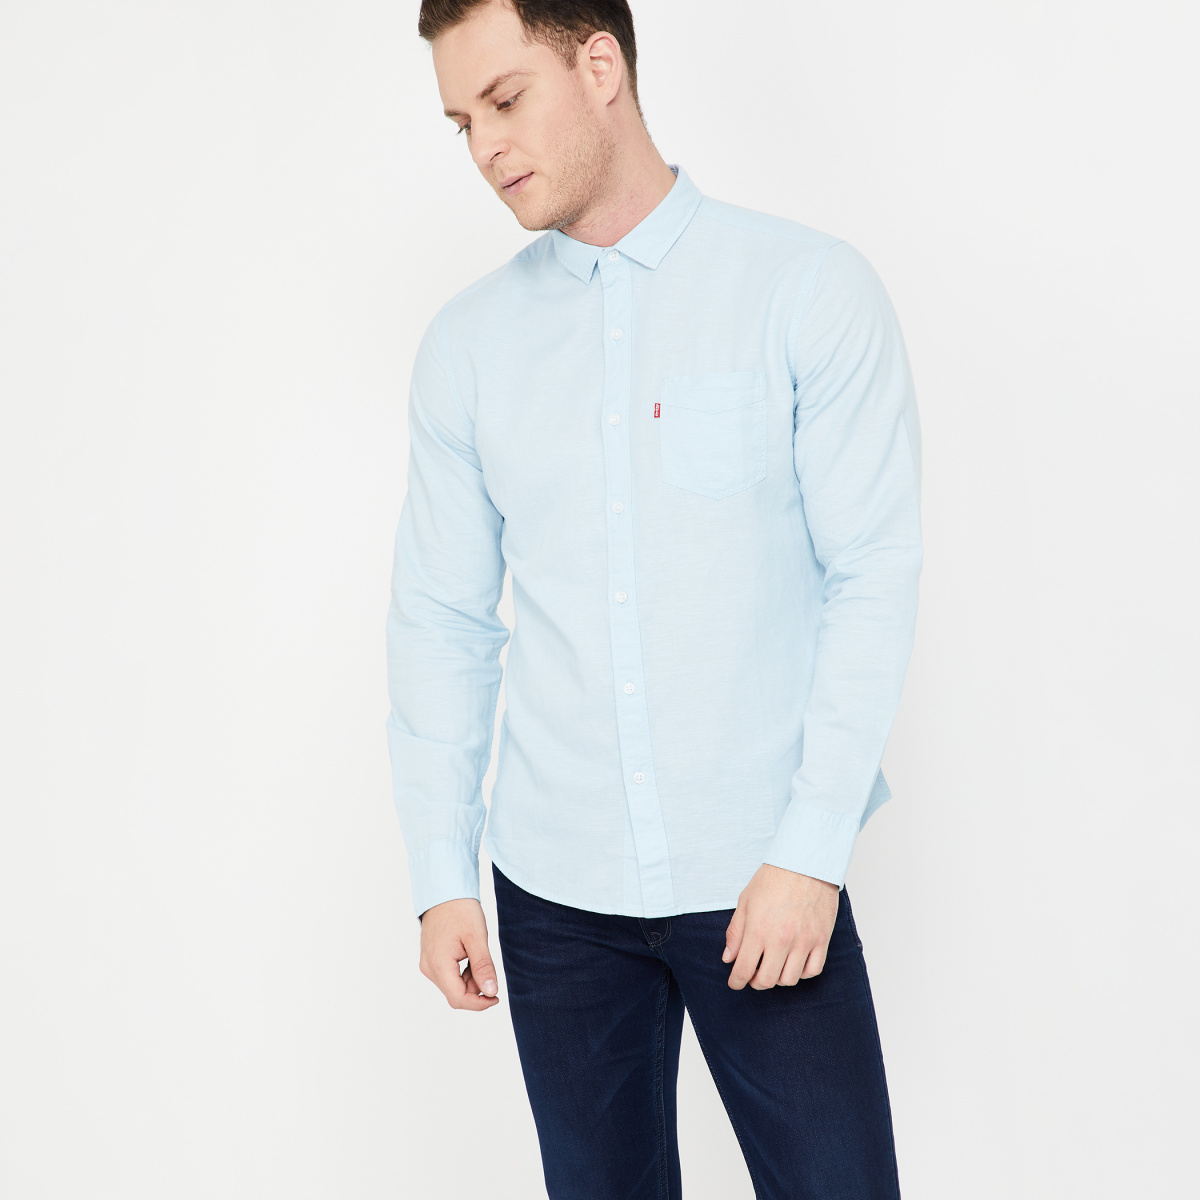 LEVI'S Solid Full Sleeves Shirt